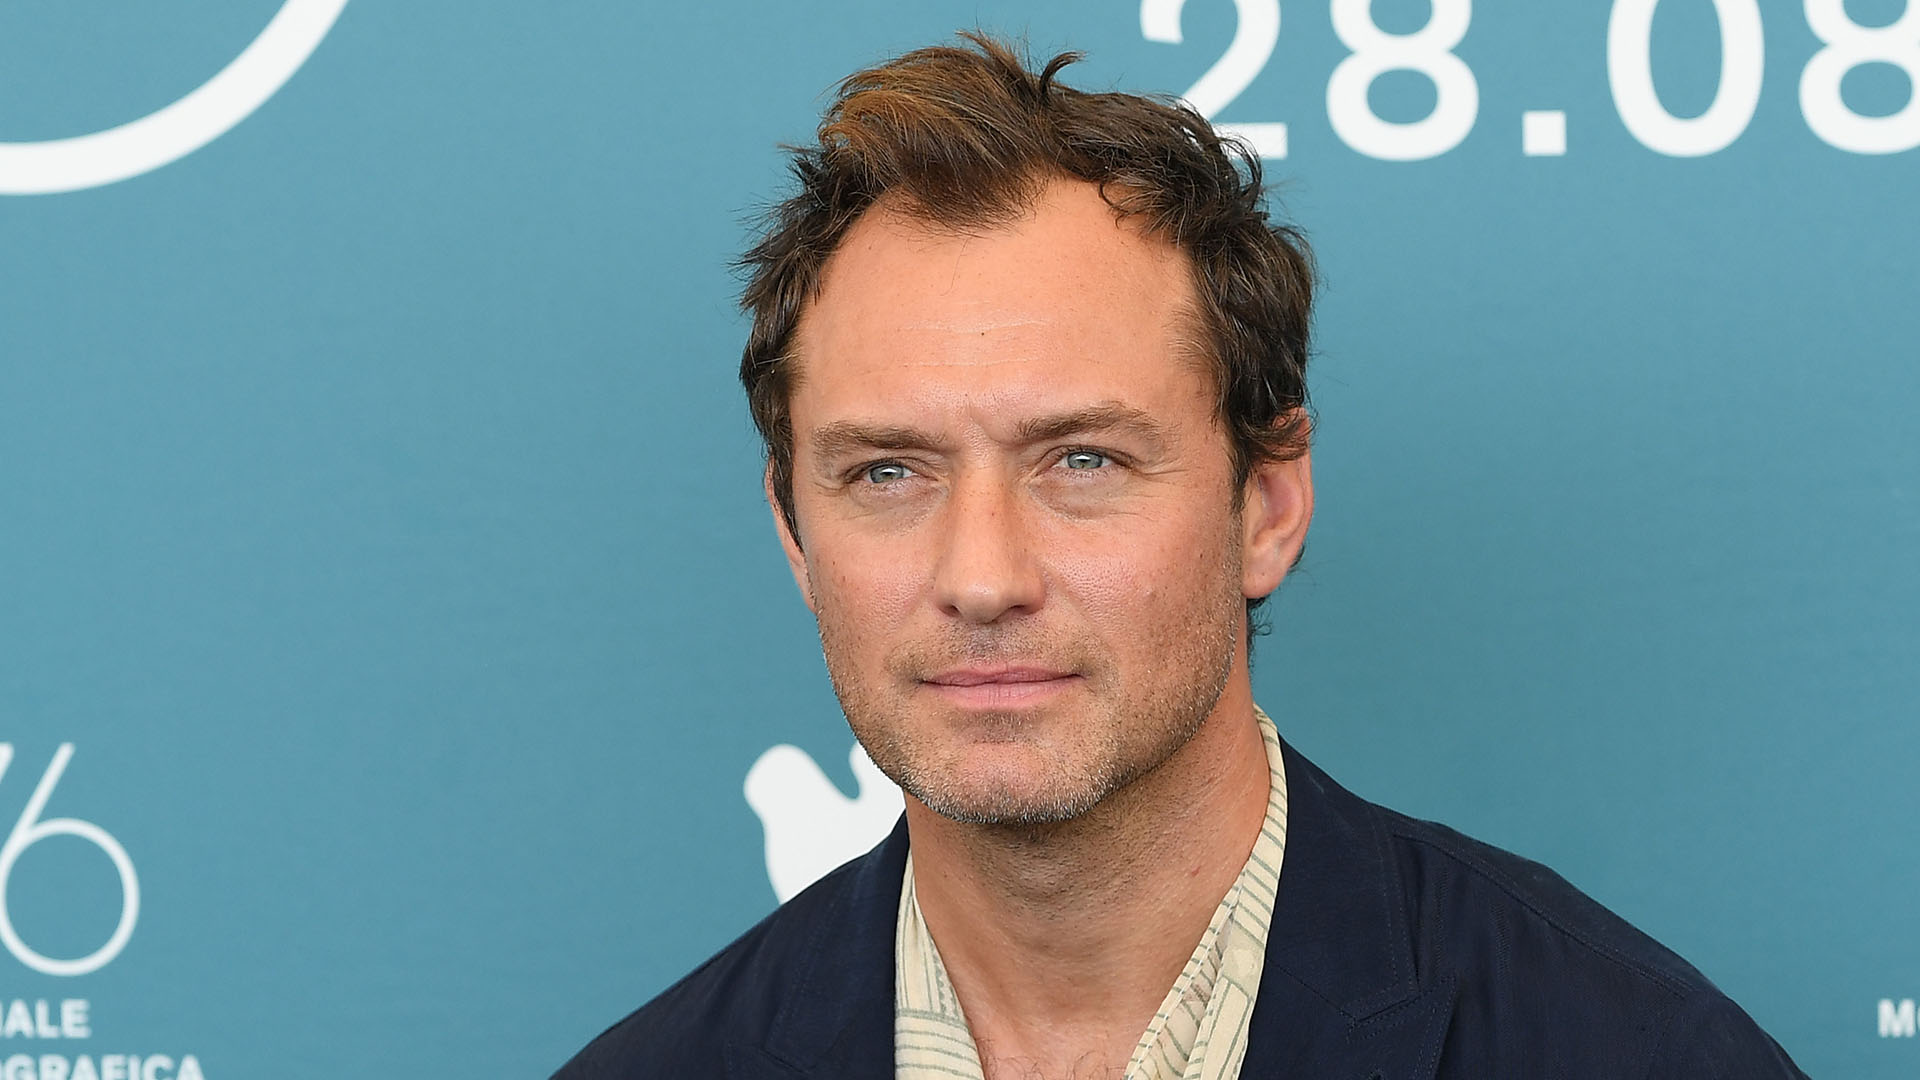 The Evolution of Jude Law: Is He a Changed Man?